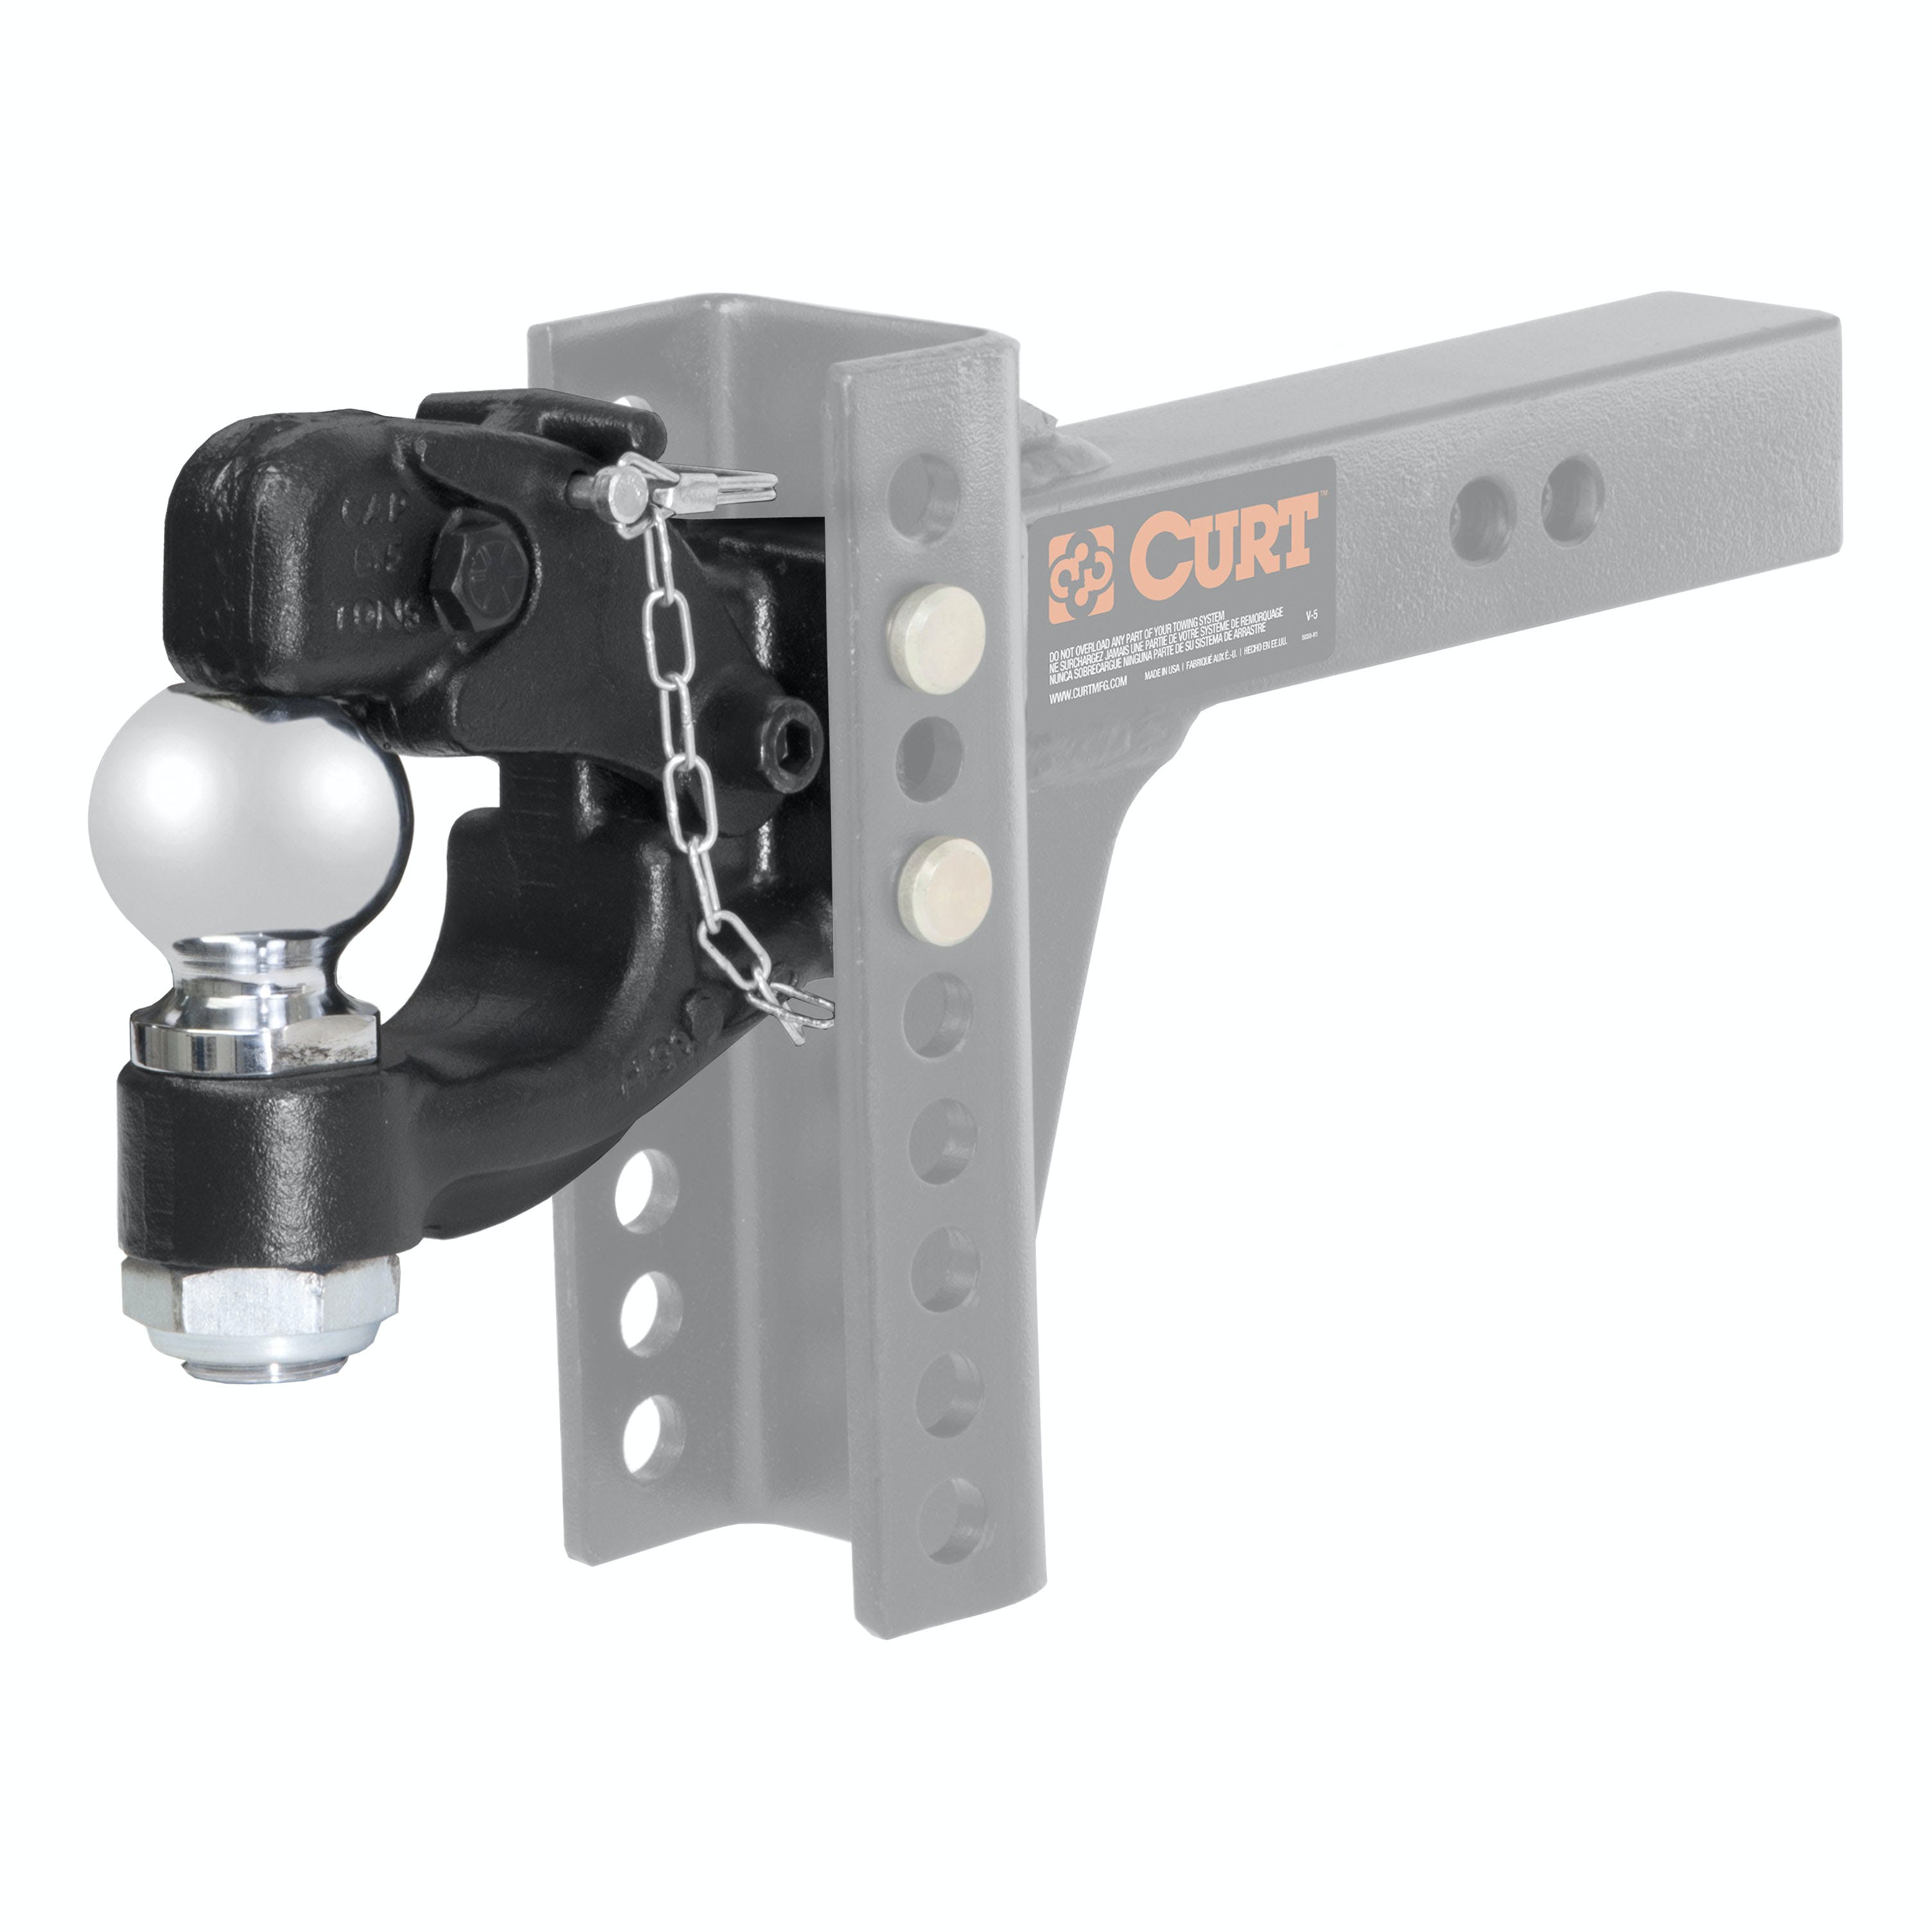 CURT 45920 Replacement Channel Mount Ball and Pintle Hitch (2-5/16 Ball, 13,000 lbs.)